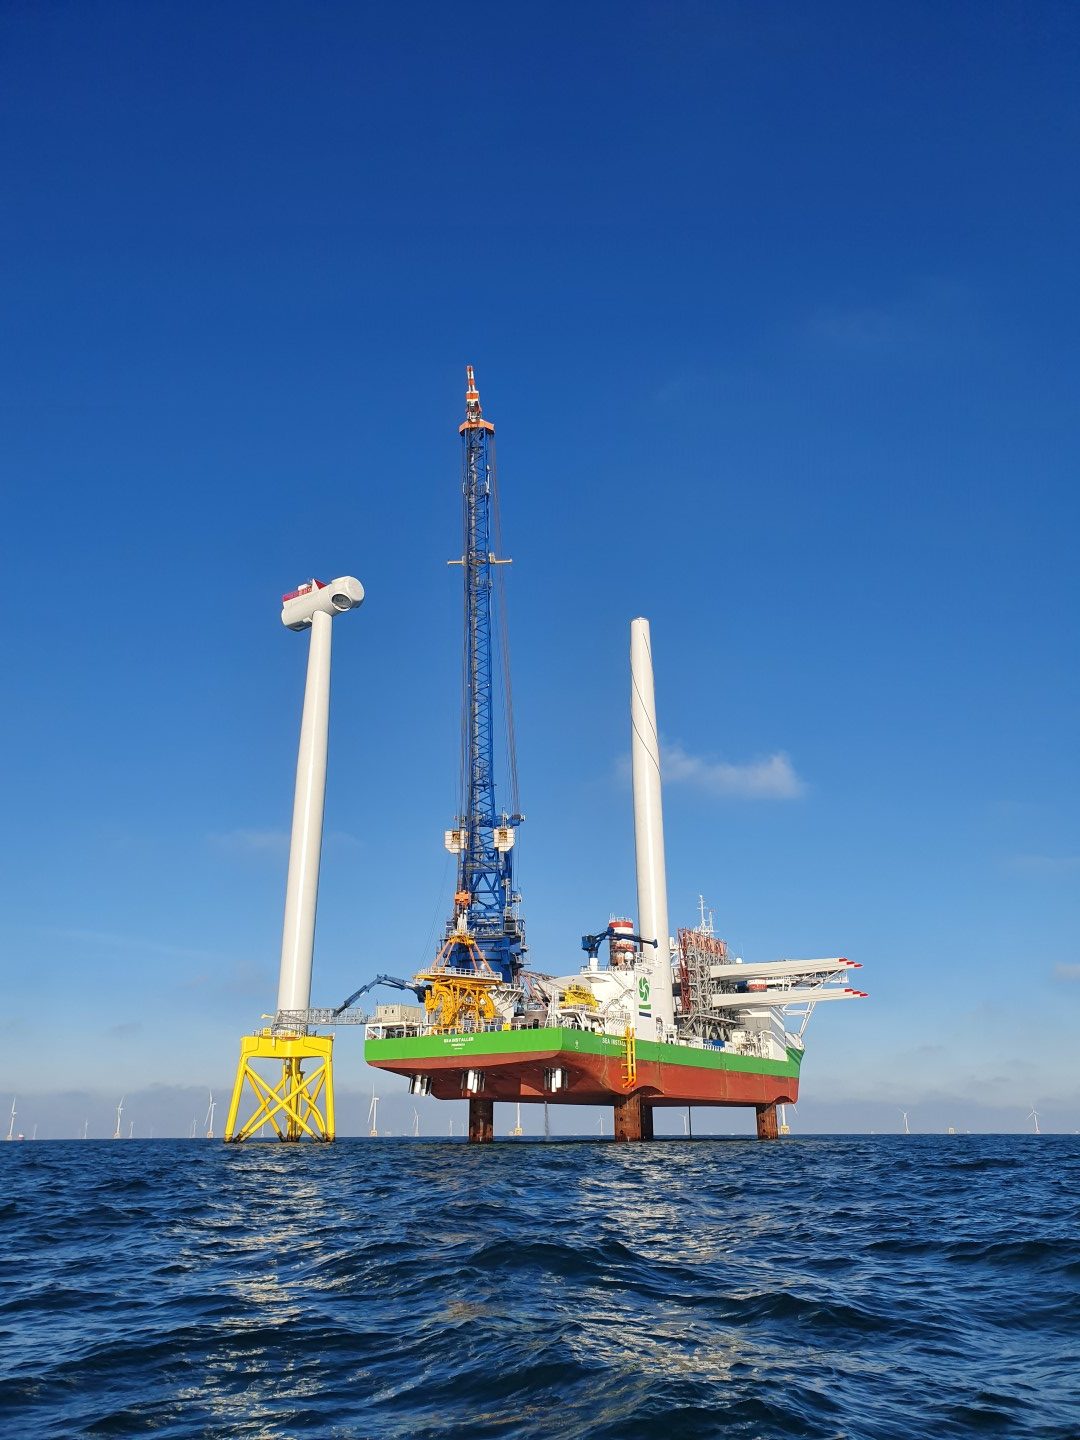 DEME Offshore Turbine installation successfully completed at East